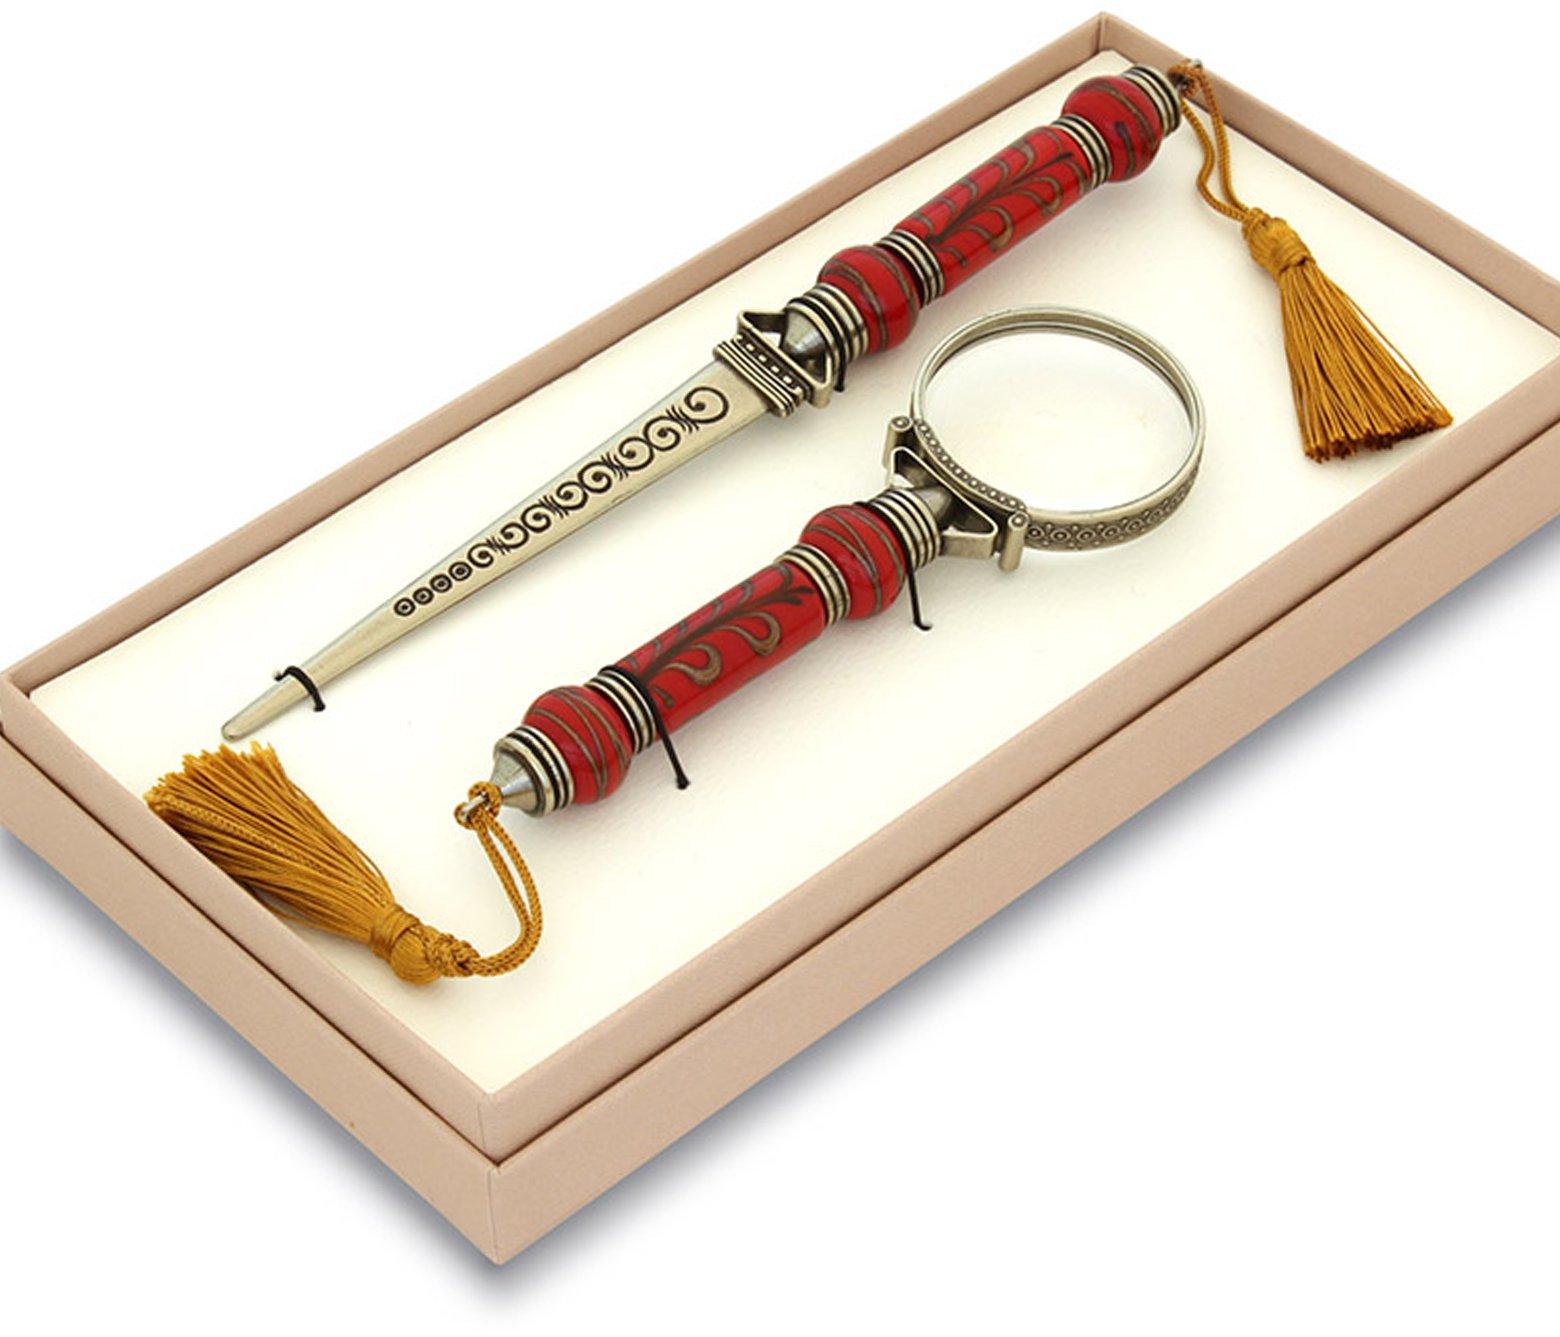 Bortoletti Red Murano Glass Paper Knife and Magnifying Lens Set at FORZIERI  Canada